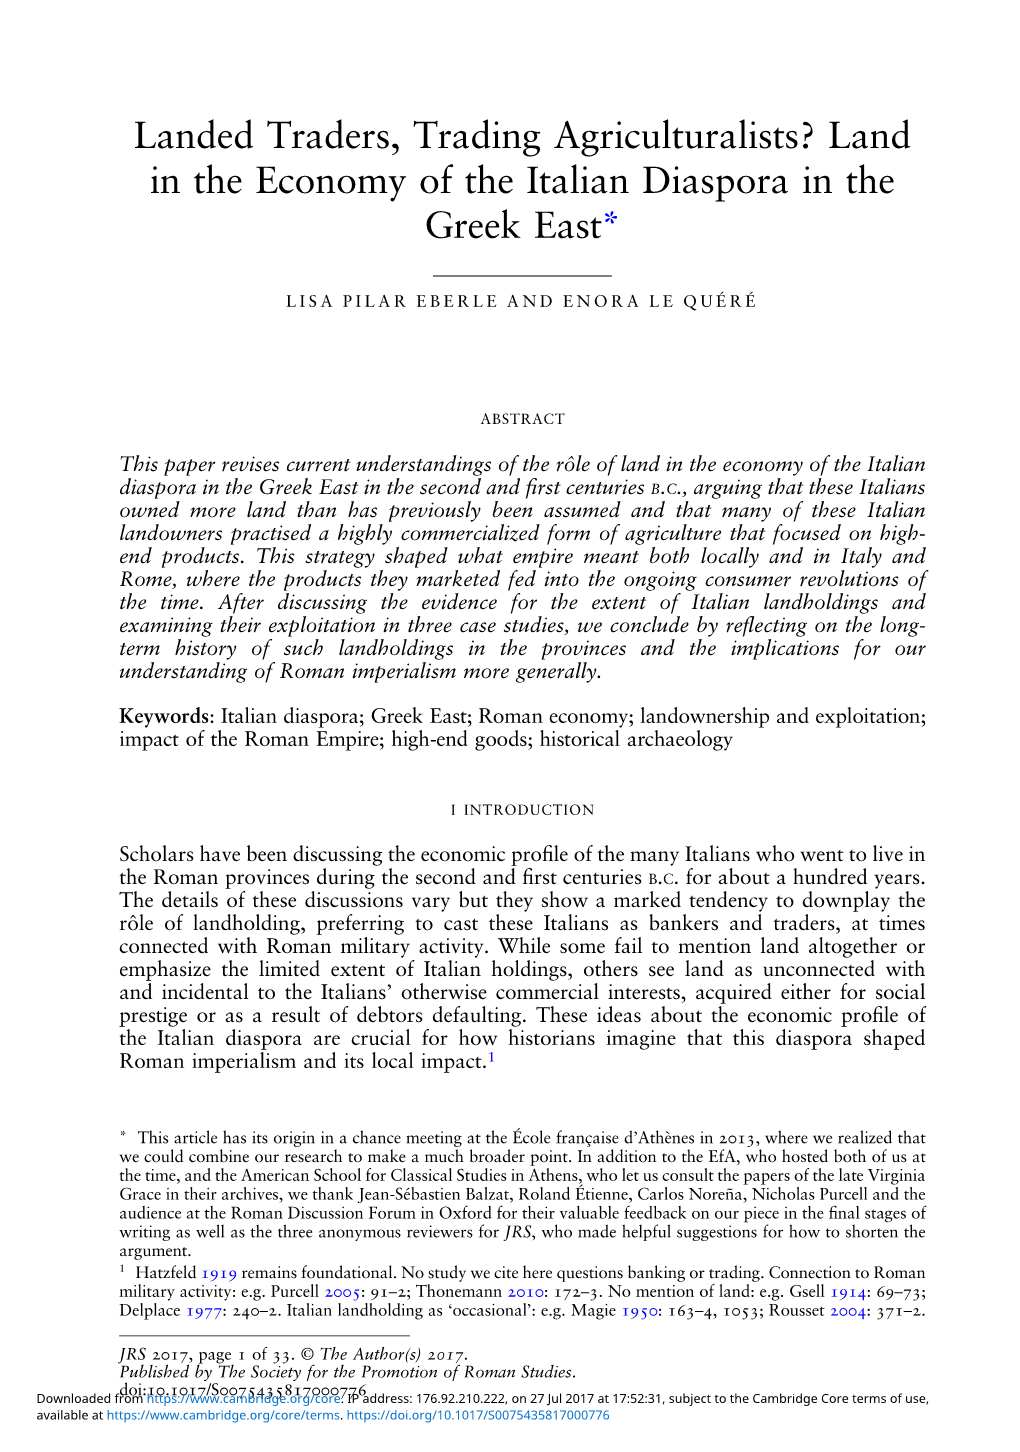 Land in the Economy of the Italian Diaspora in the Greek East*